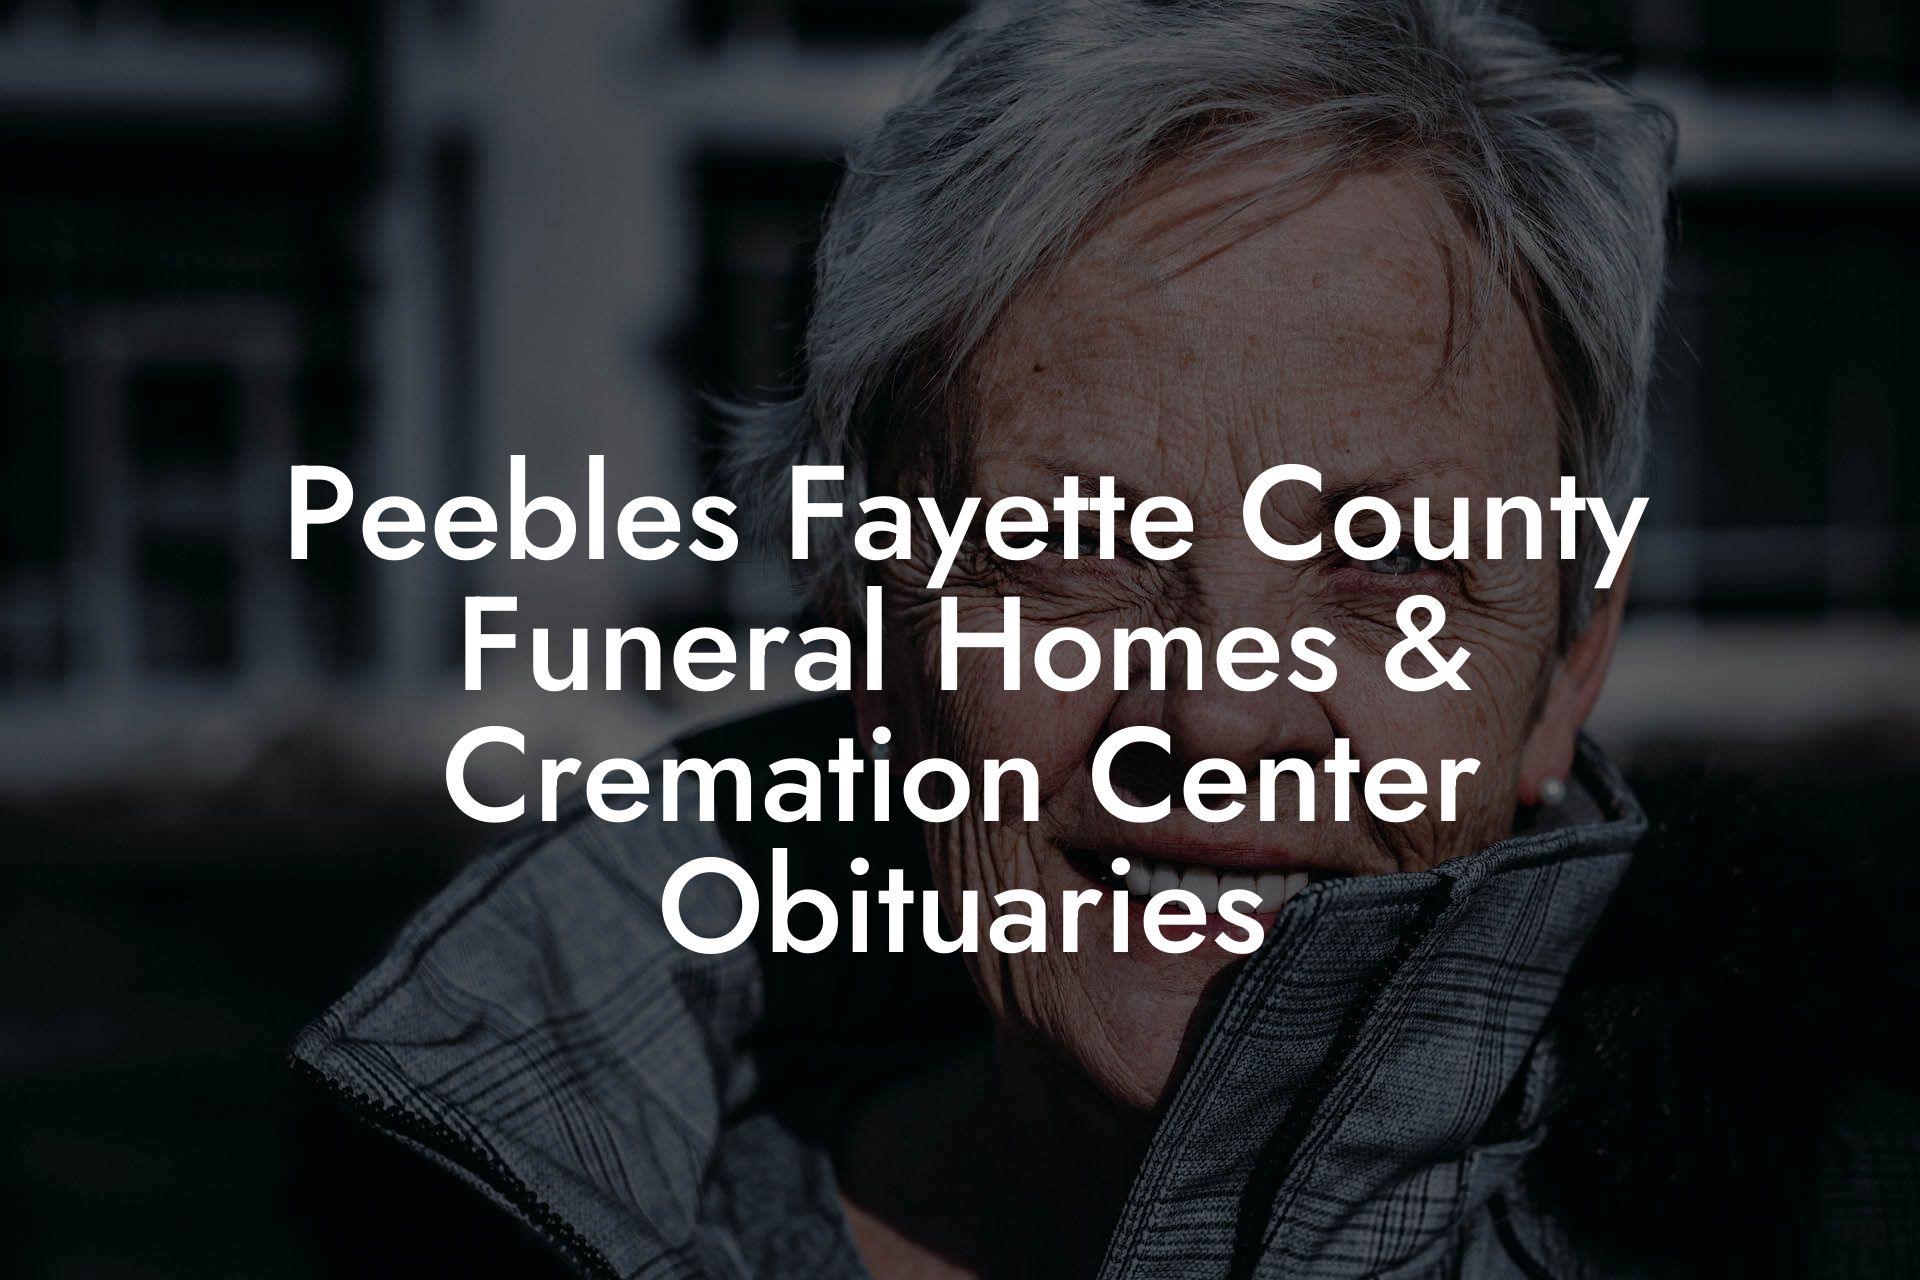 Peebles Fayette County Funeral Homes & Cremation Center Obituaries